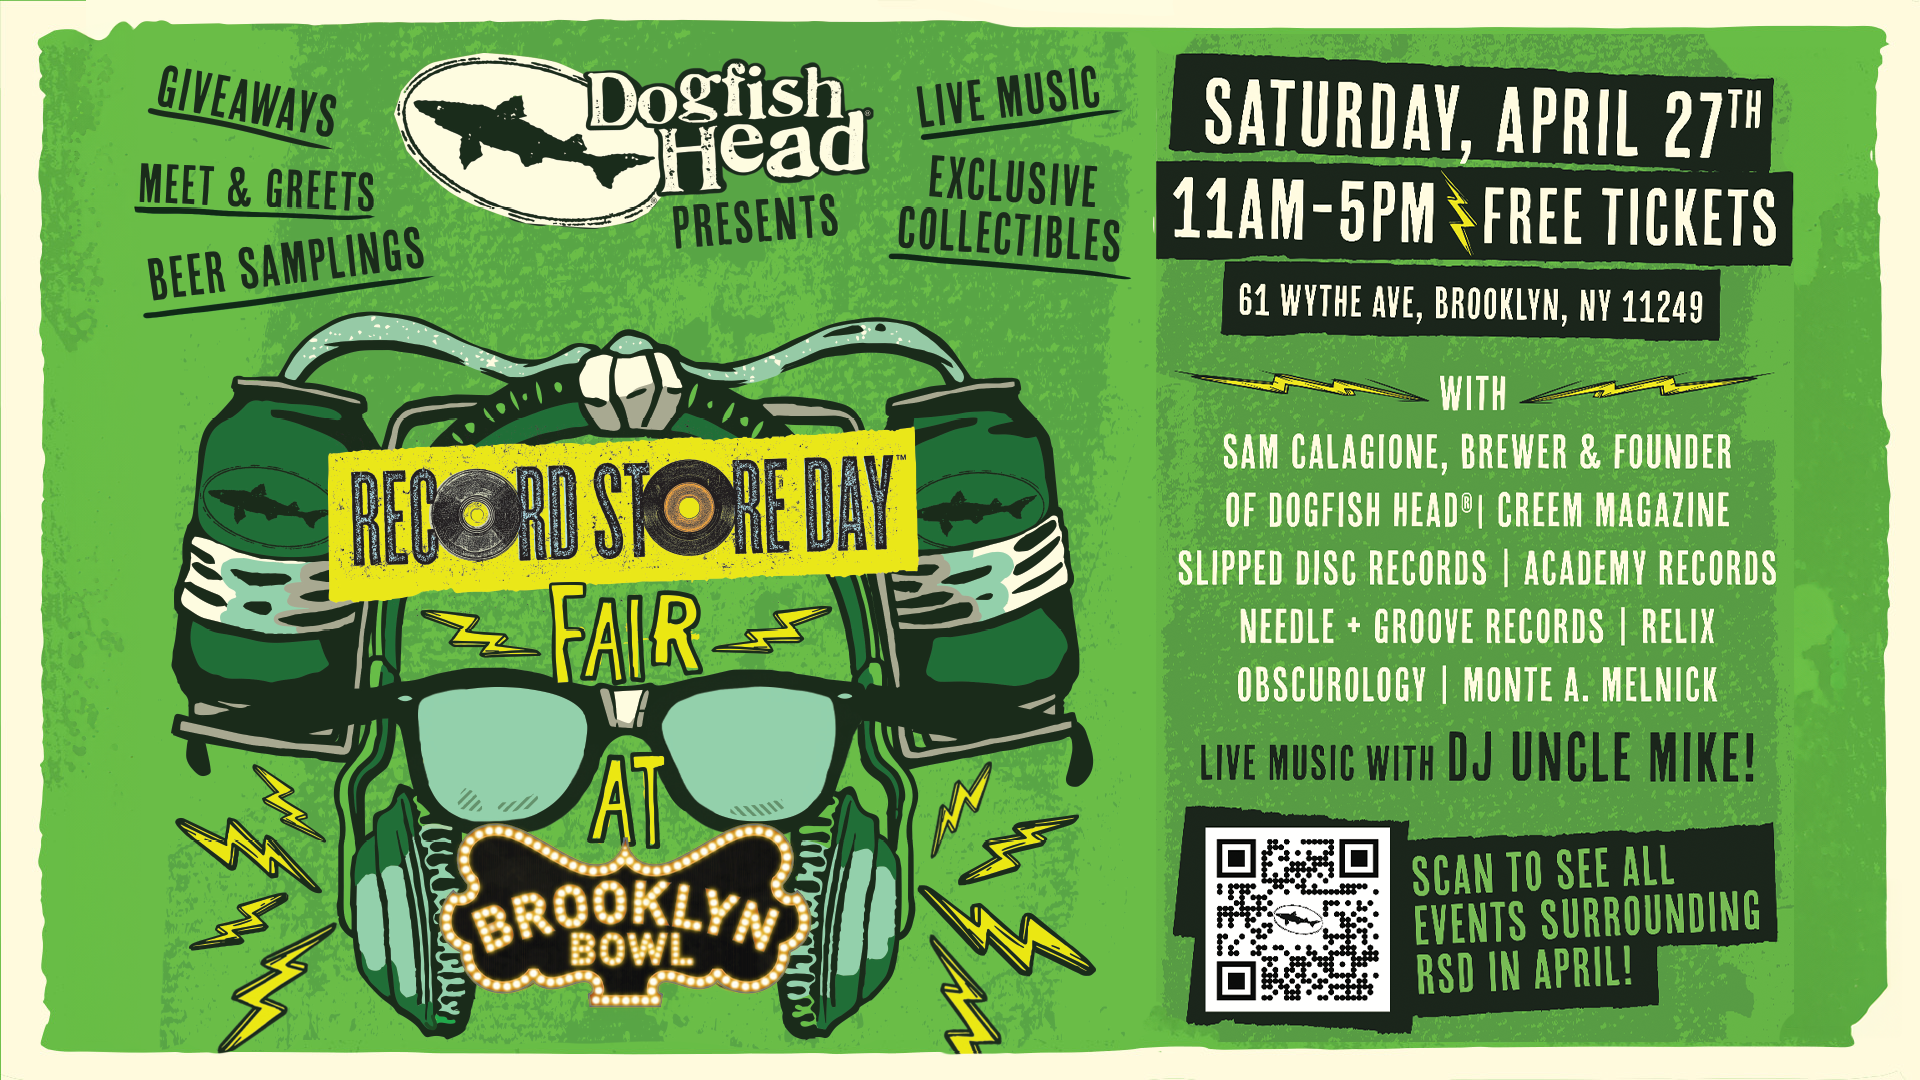 Dogfish Head Presents Record Store Day Fair